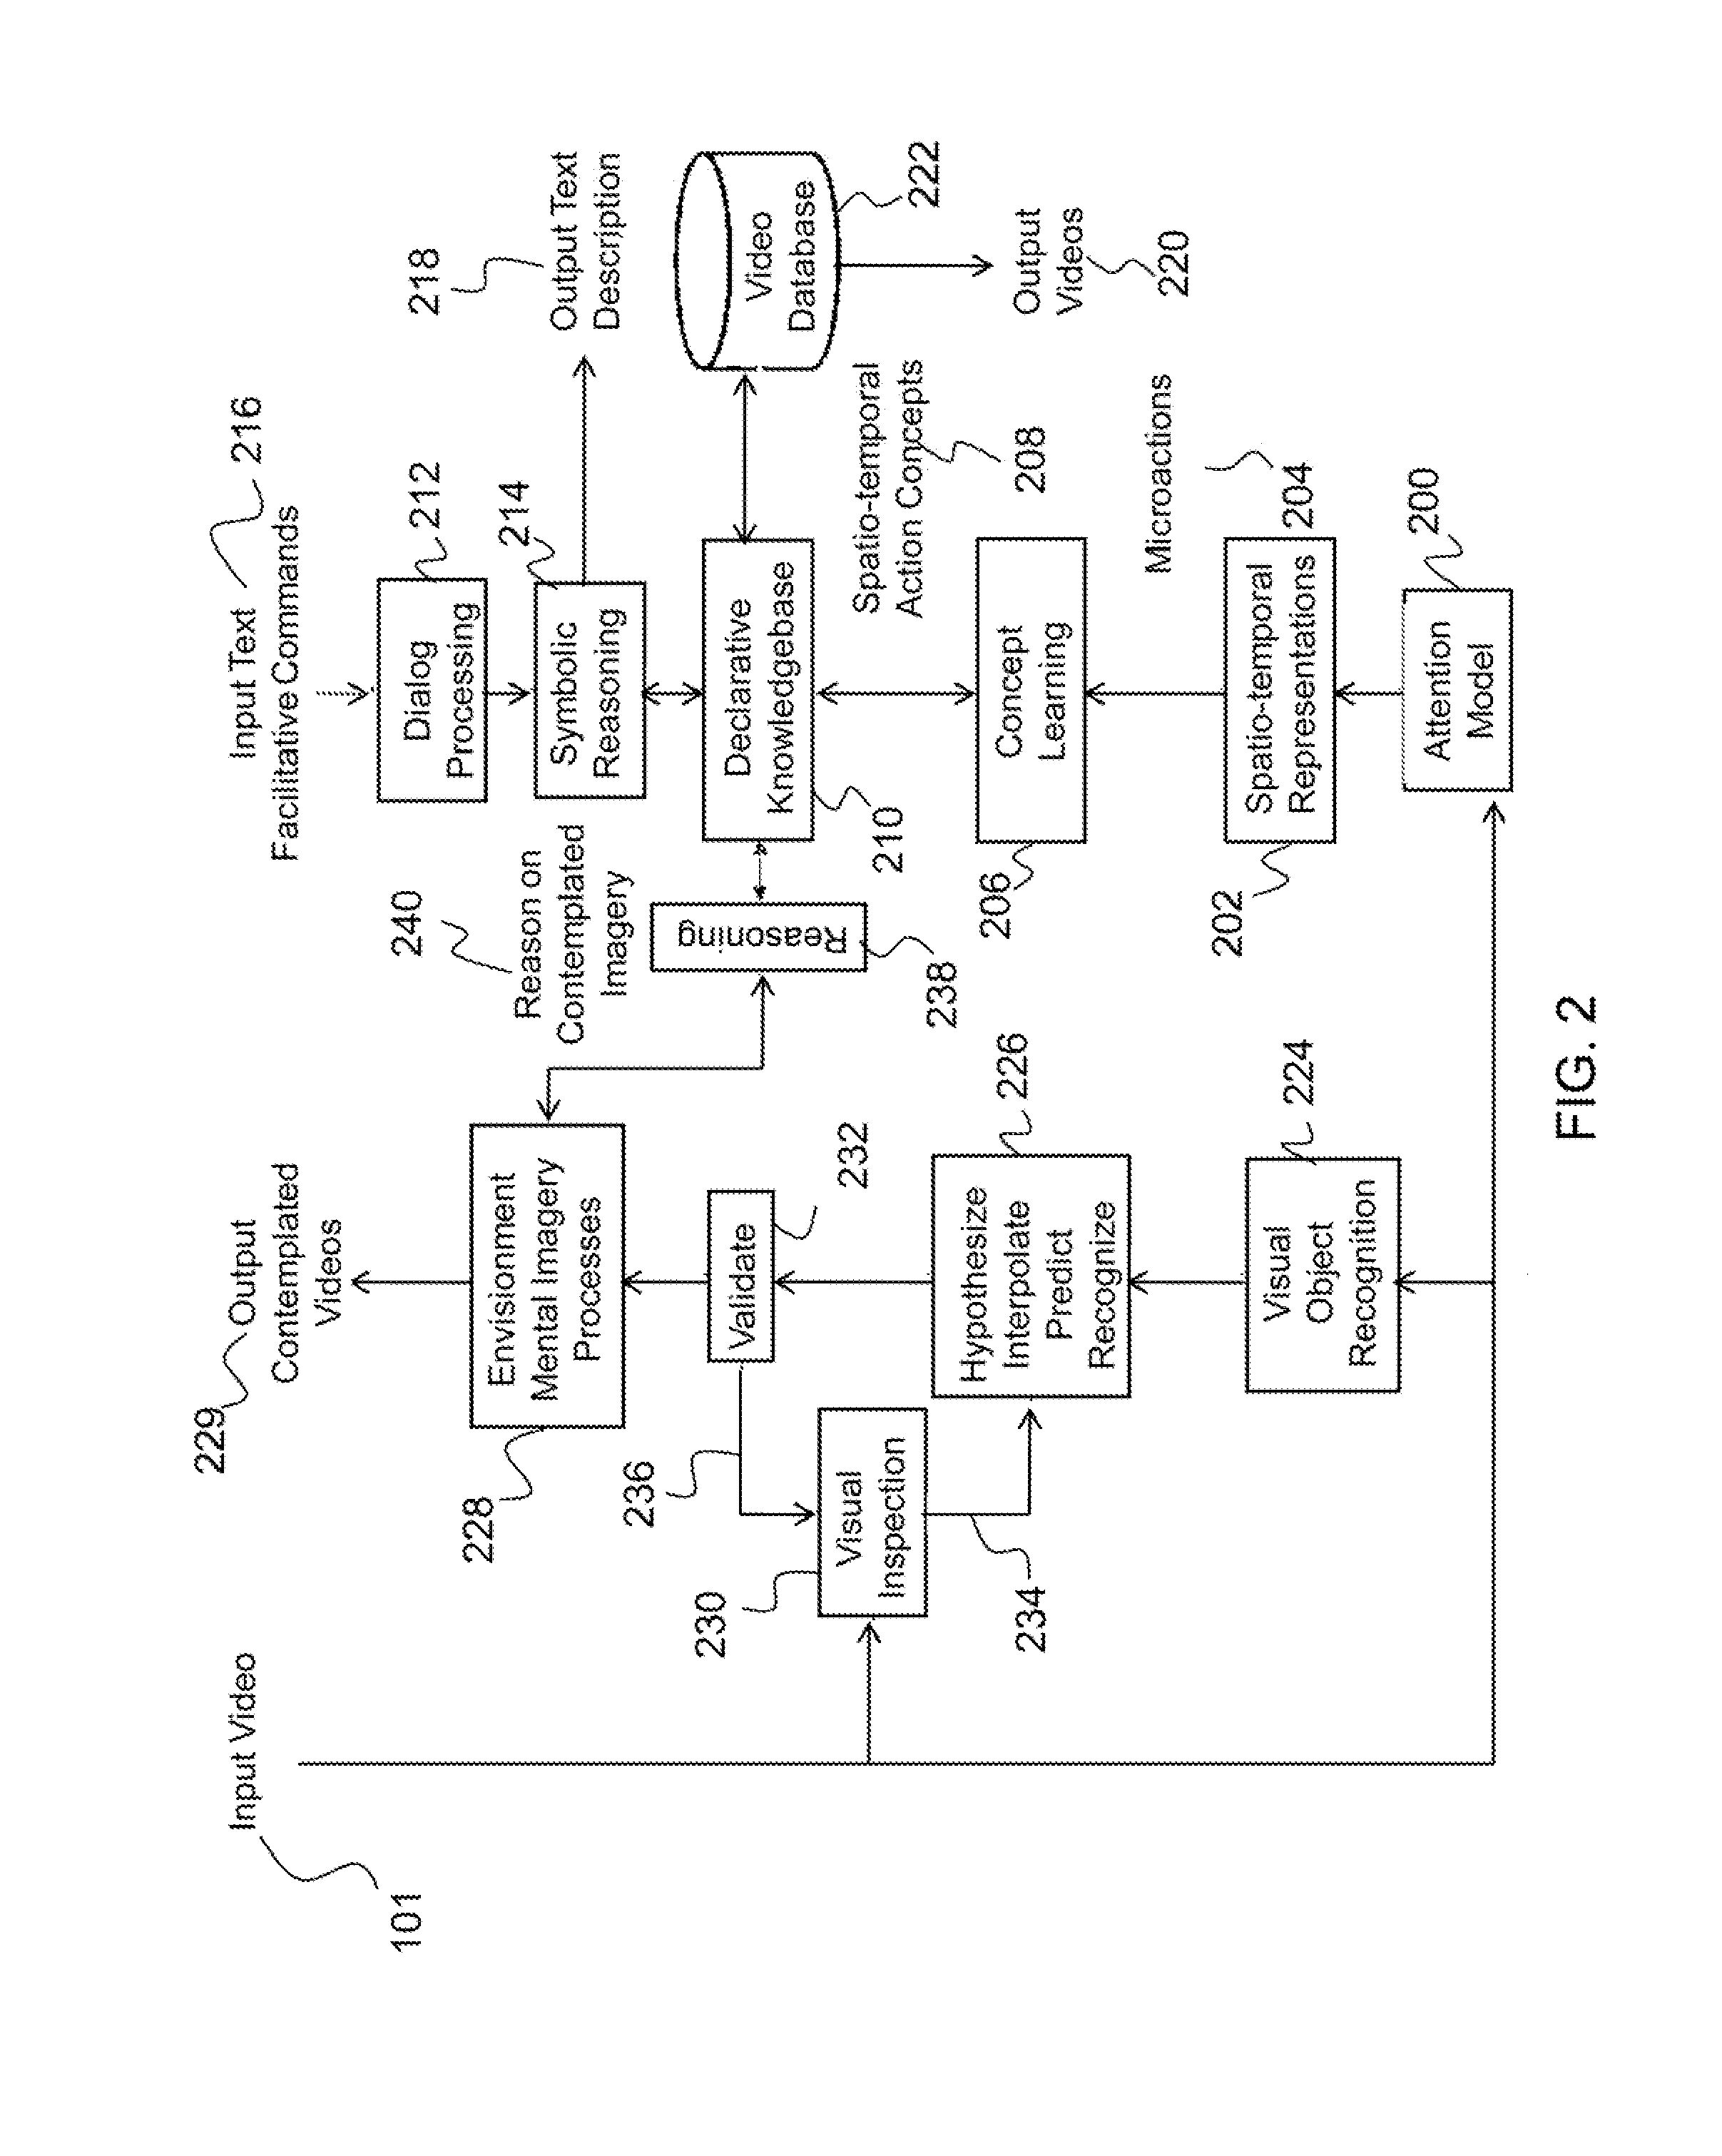 Method and system for embedding visual intelligence